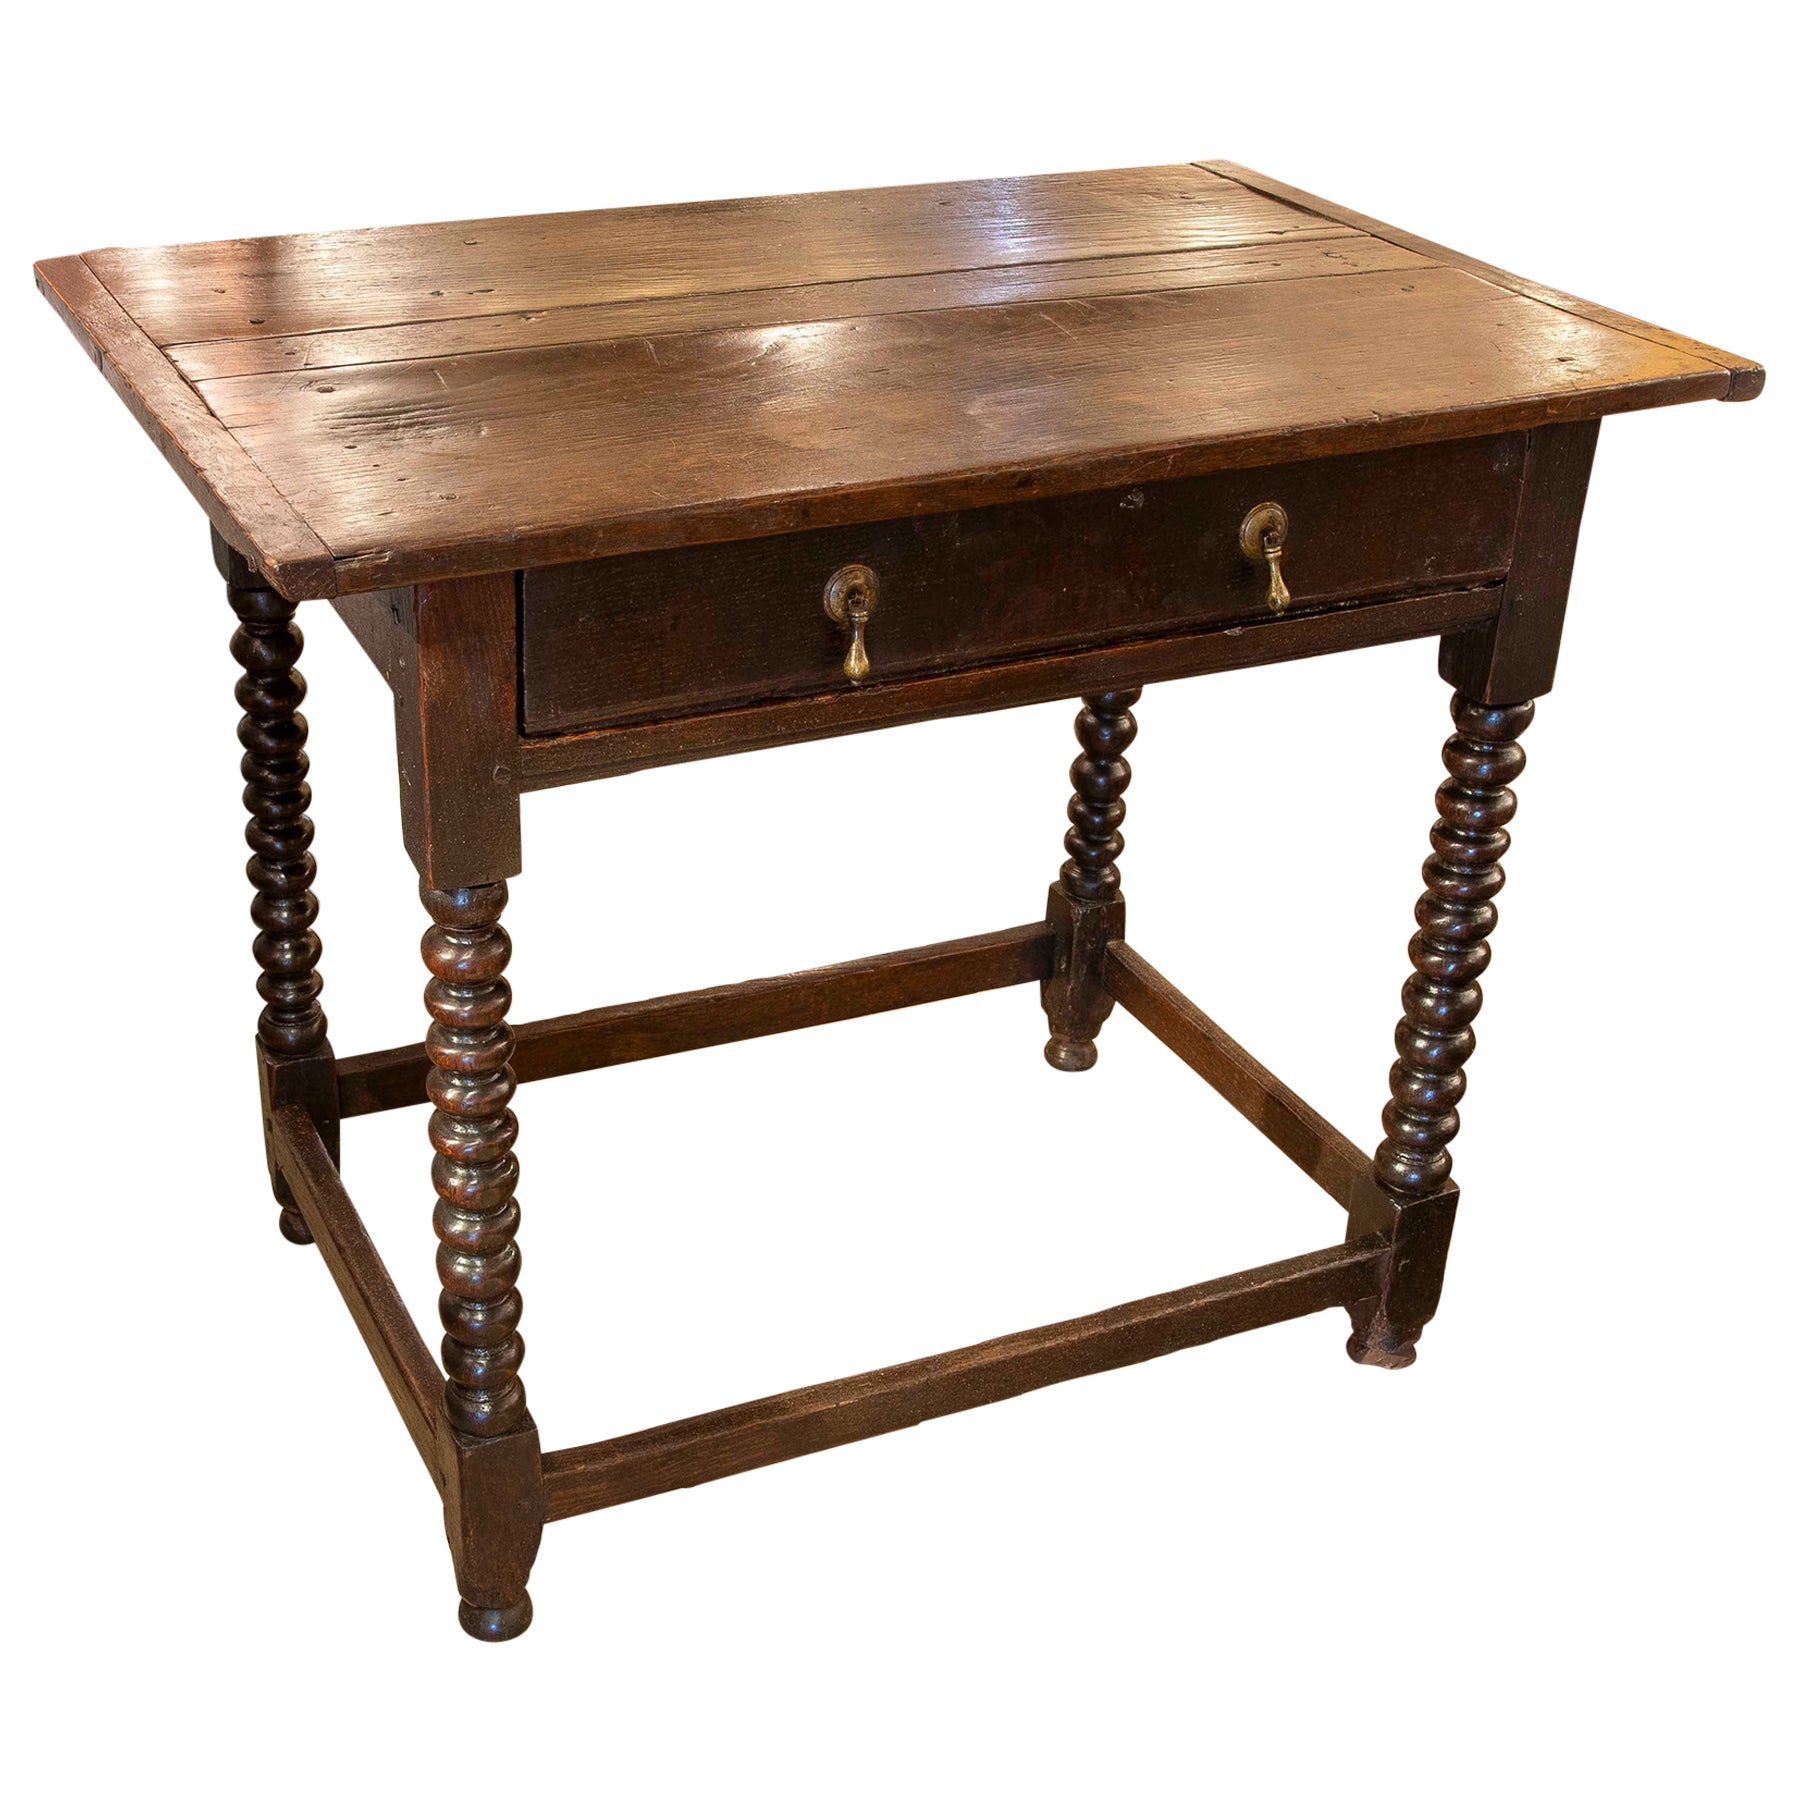 19th Century Spanish Wooden Table with Drawer with Turned Legs For Sale